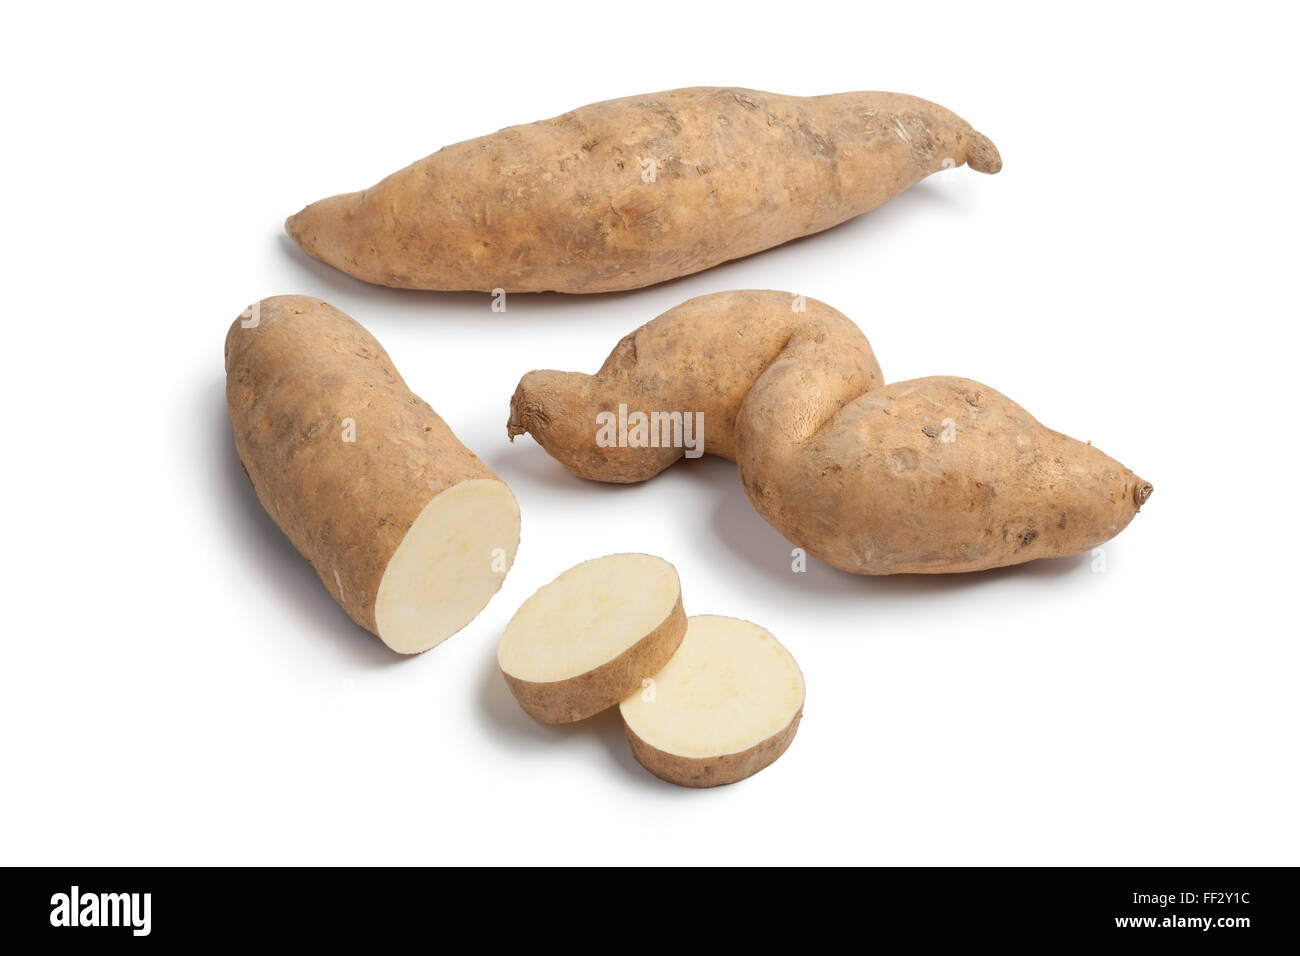 Sweet potatoes and slices on white background Stock Photo